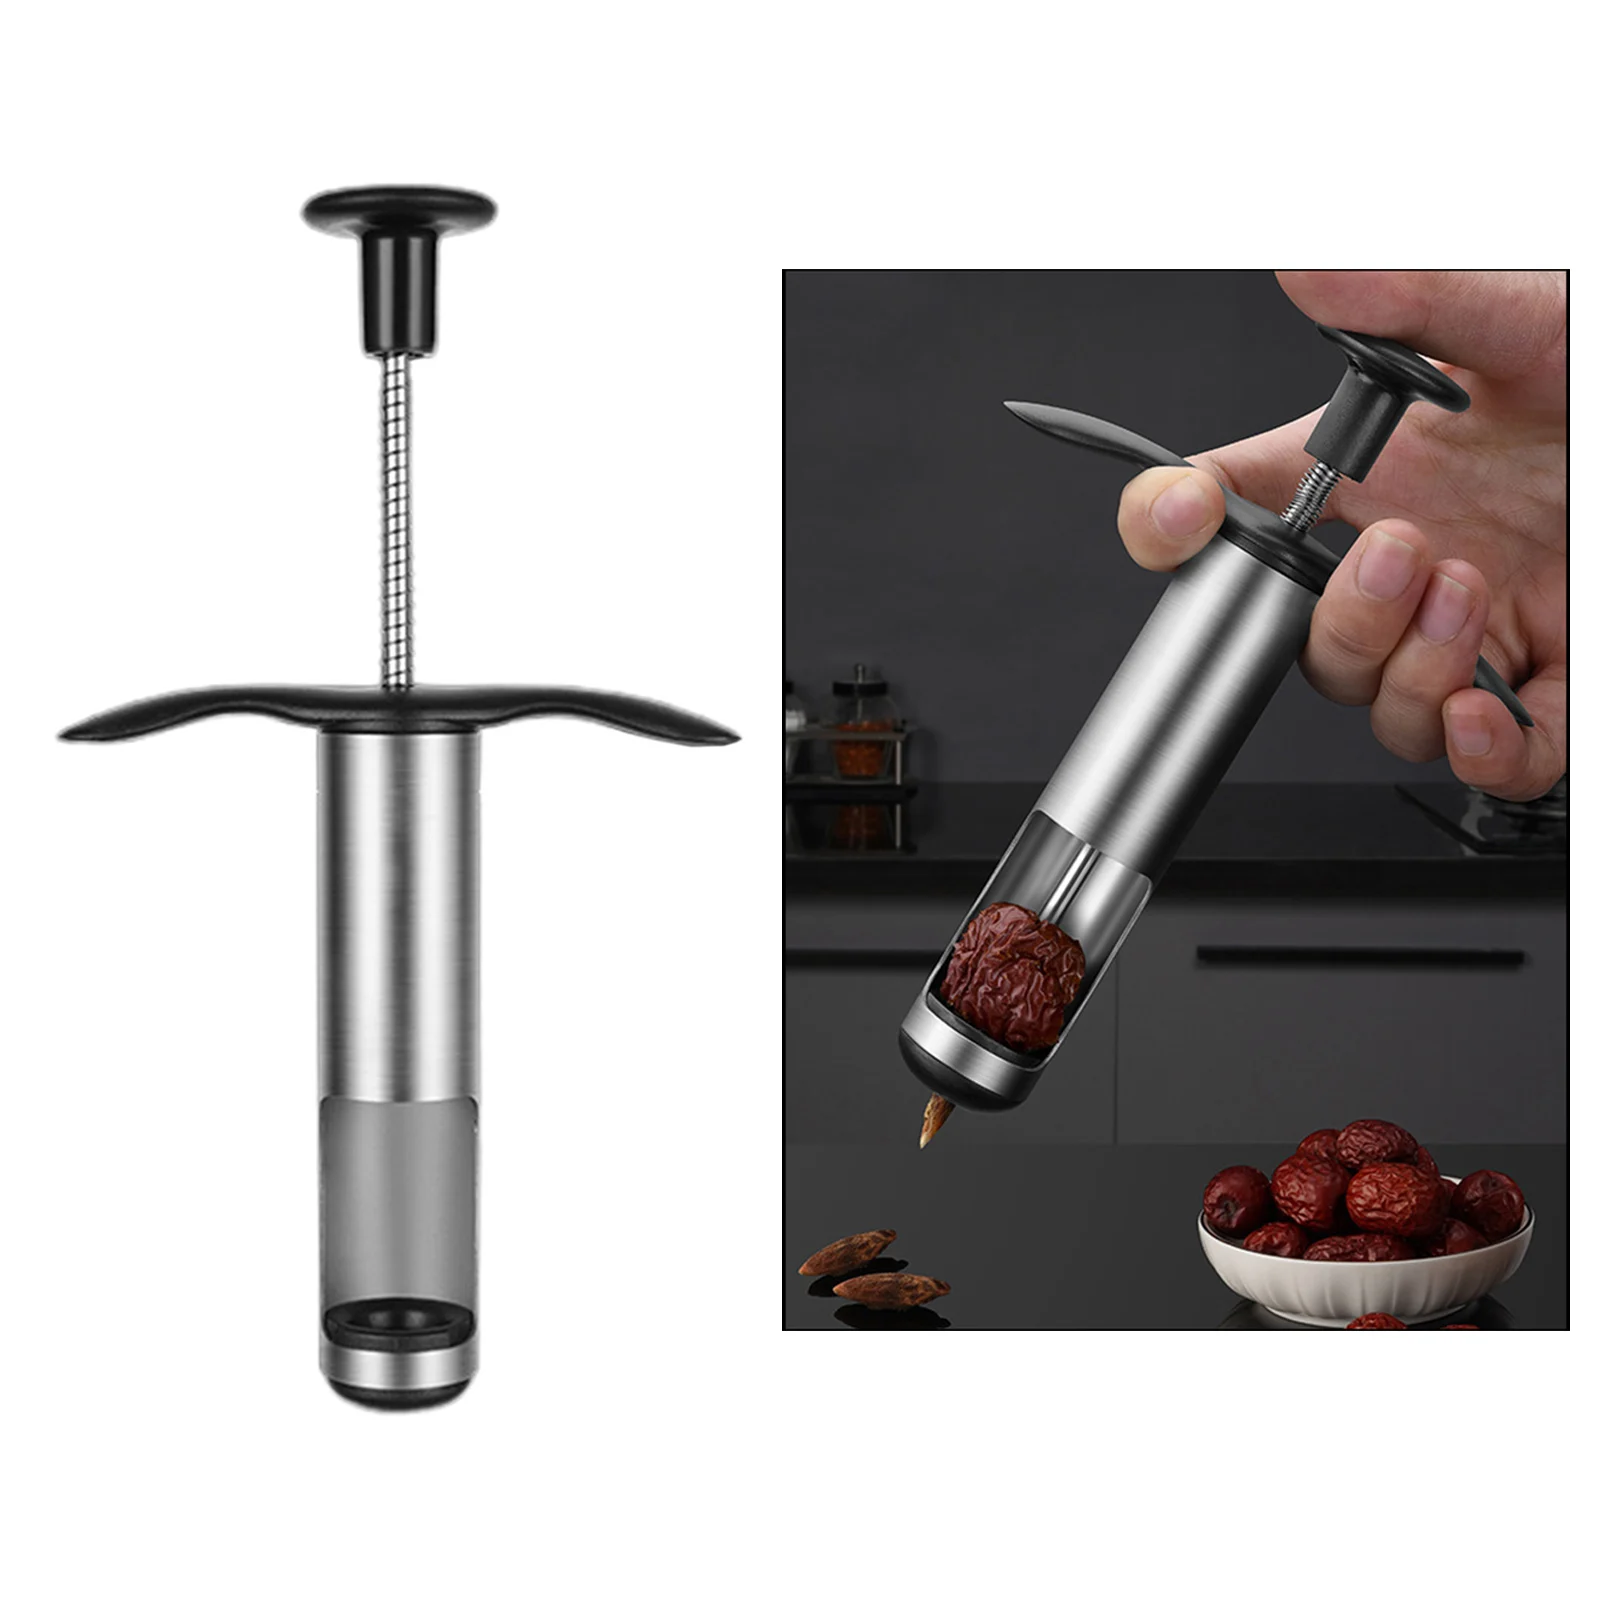 Red Date Nucleus Artifact Push Type Fruit Pineapple Peeler Corer for Red Date Pear Cherry Jujube Home Kitchen Accessories